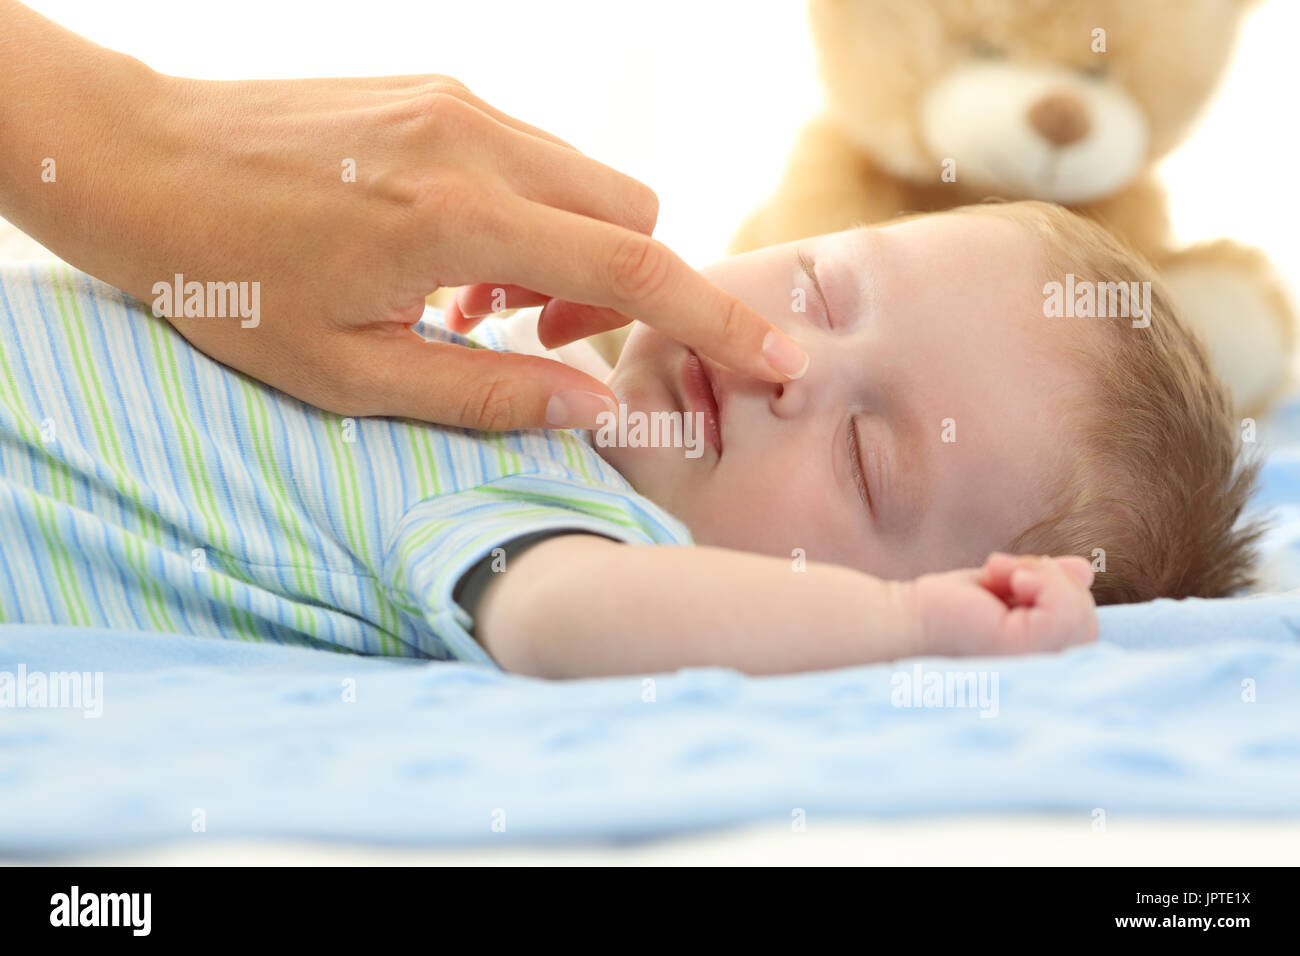 Mother hand touching the nose of a baby sleeping on a bed Stock Photo